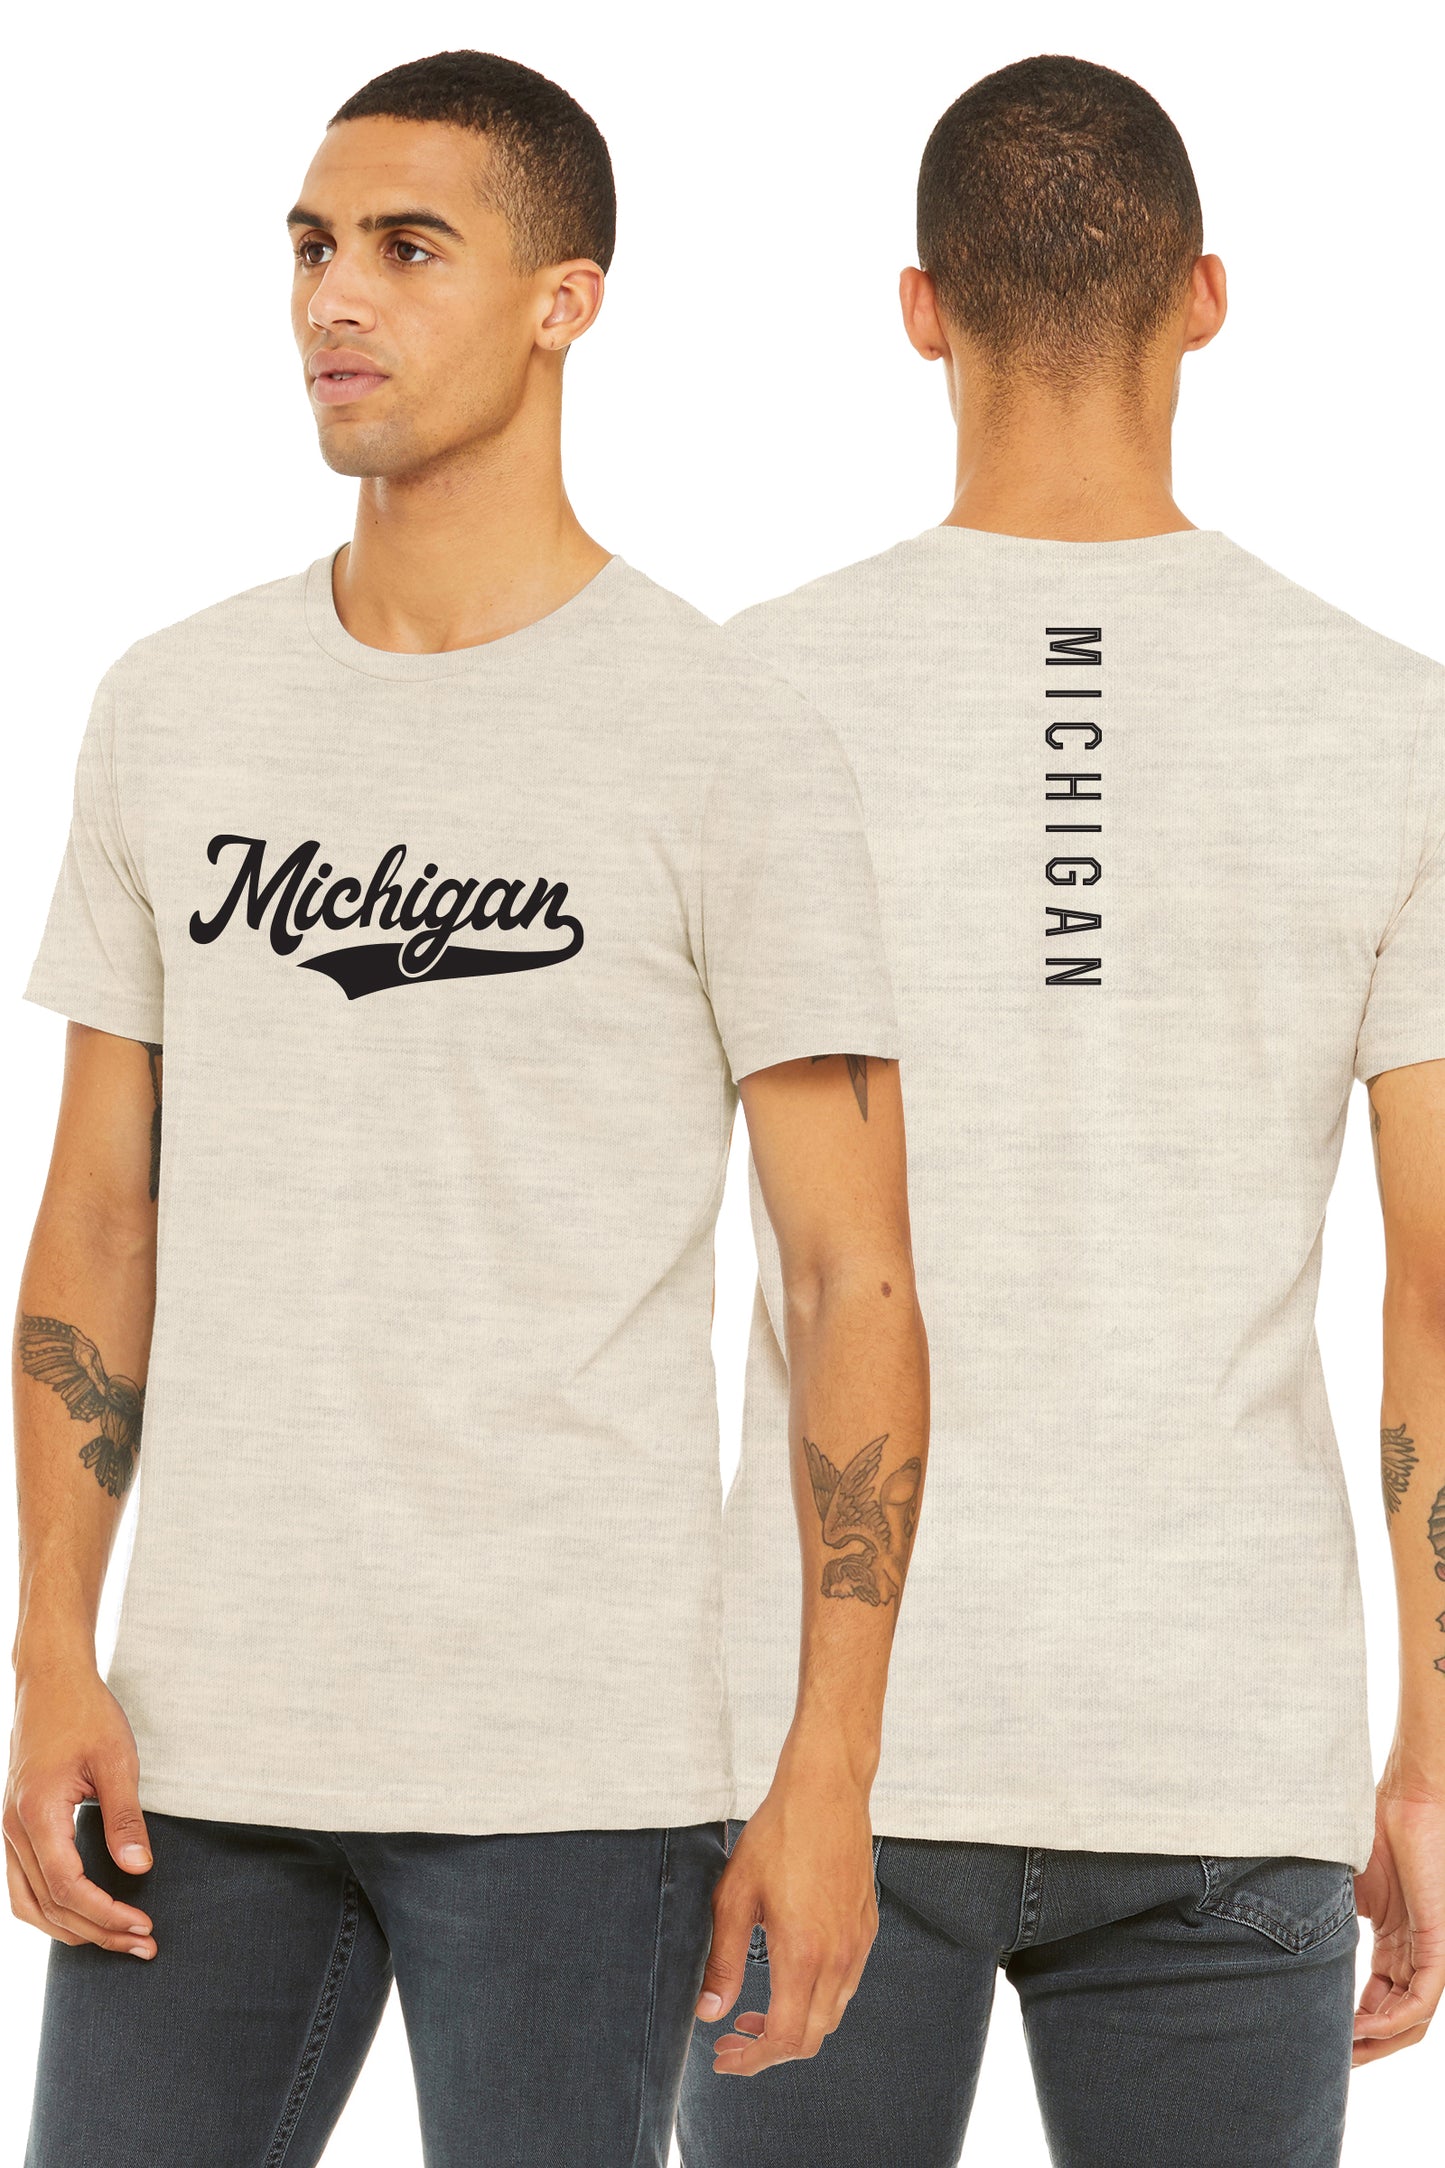 Daxton Adult Unisex Tshirt Michigan Script with Vertical on the Back